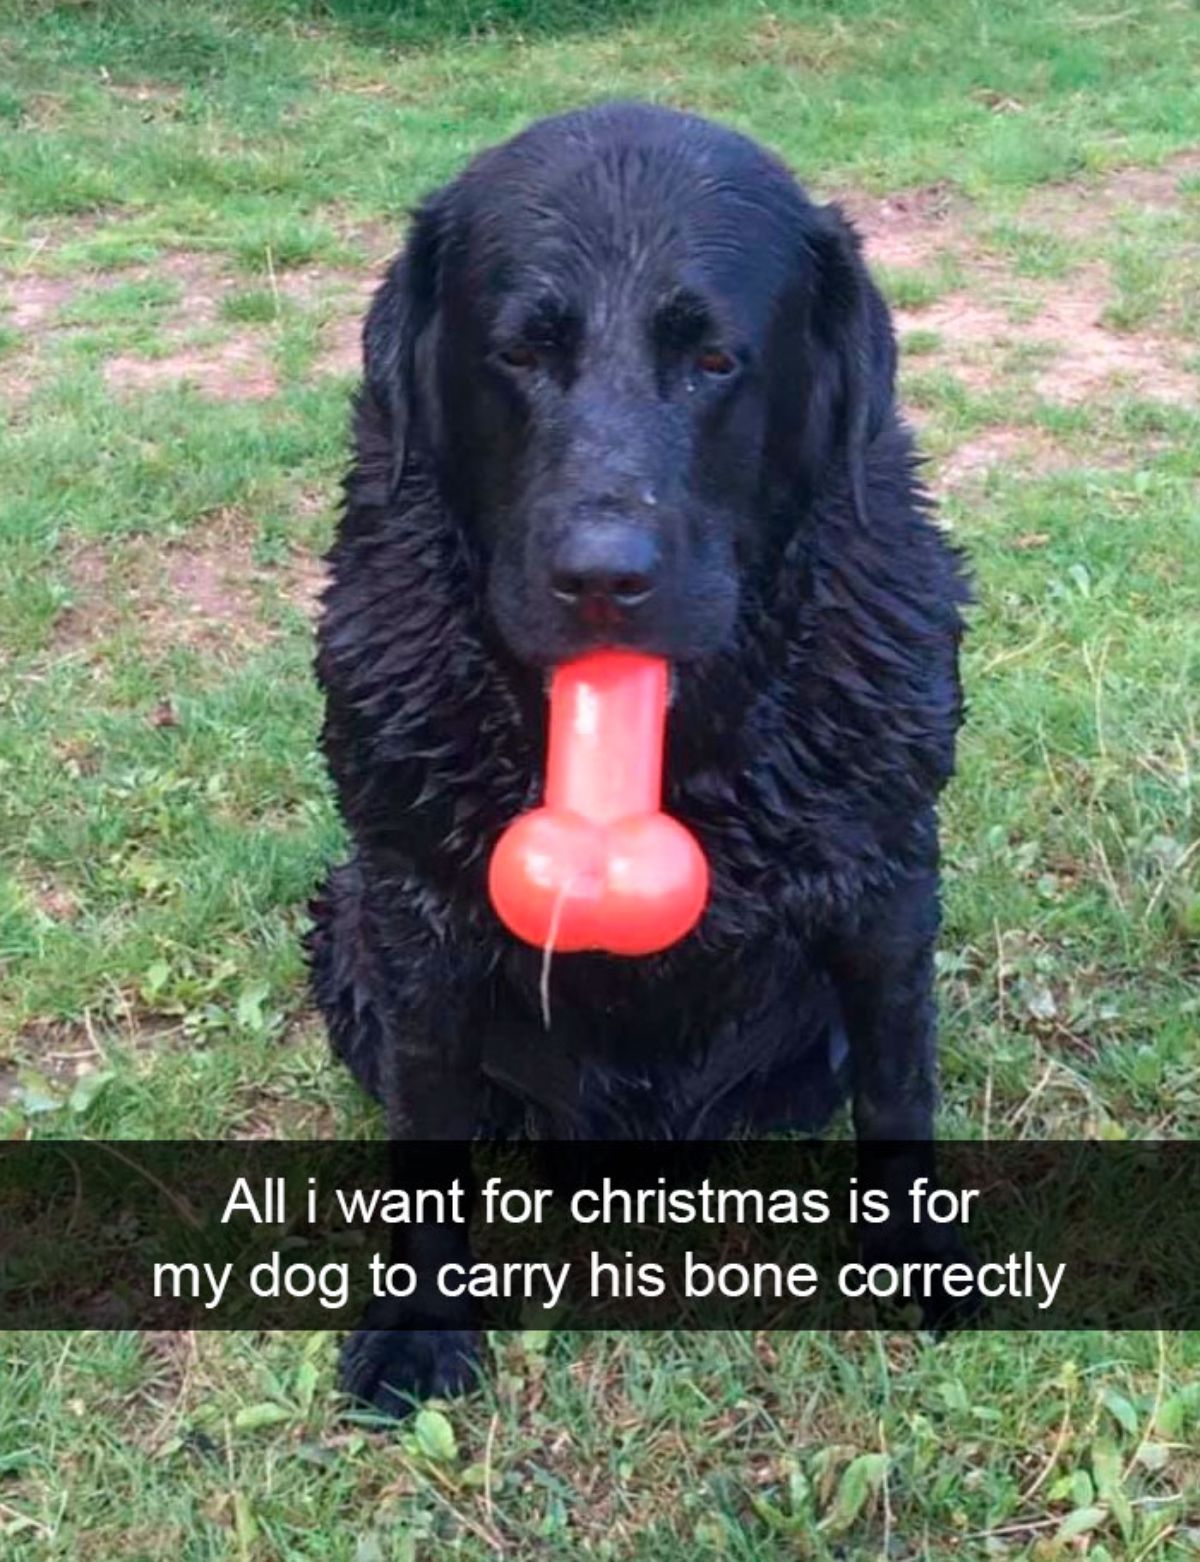 black dog sitting with half of a red bone sticking out of its mouth with a caption saying all i want for christmas is for my dog to carry his bone correctly